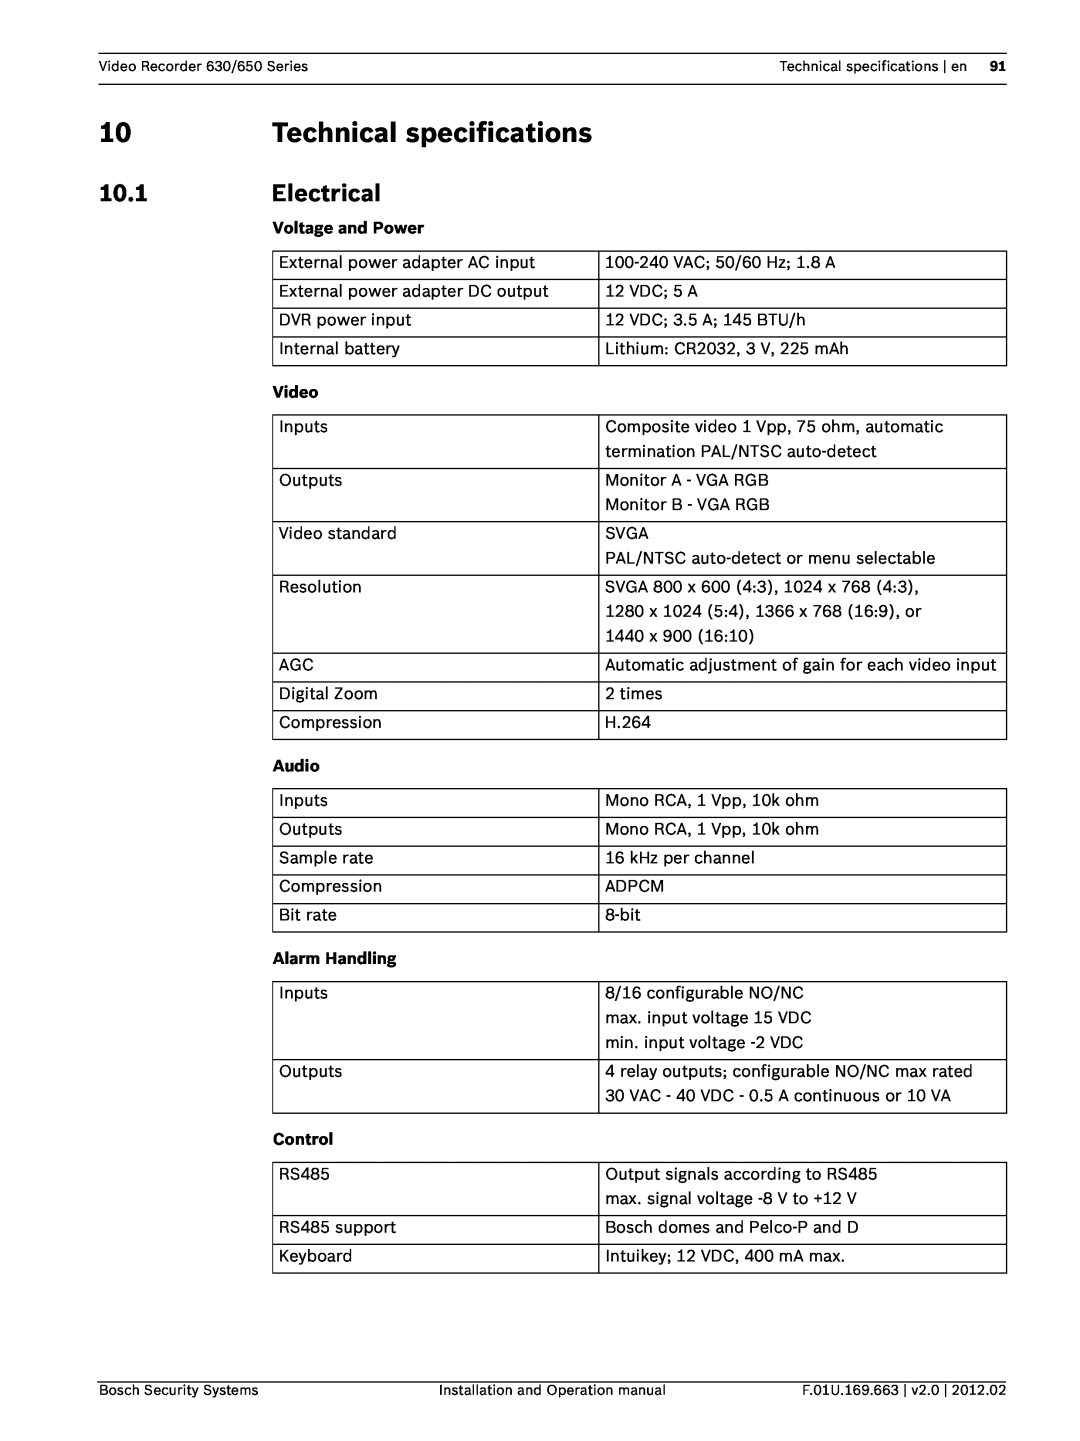 Bosch Appliances 630 Technical specifications, 10.1, Electrical, Voltage and Power, Video, Alarm Handling, Control, Audio 